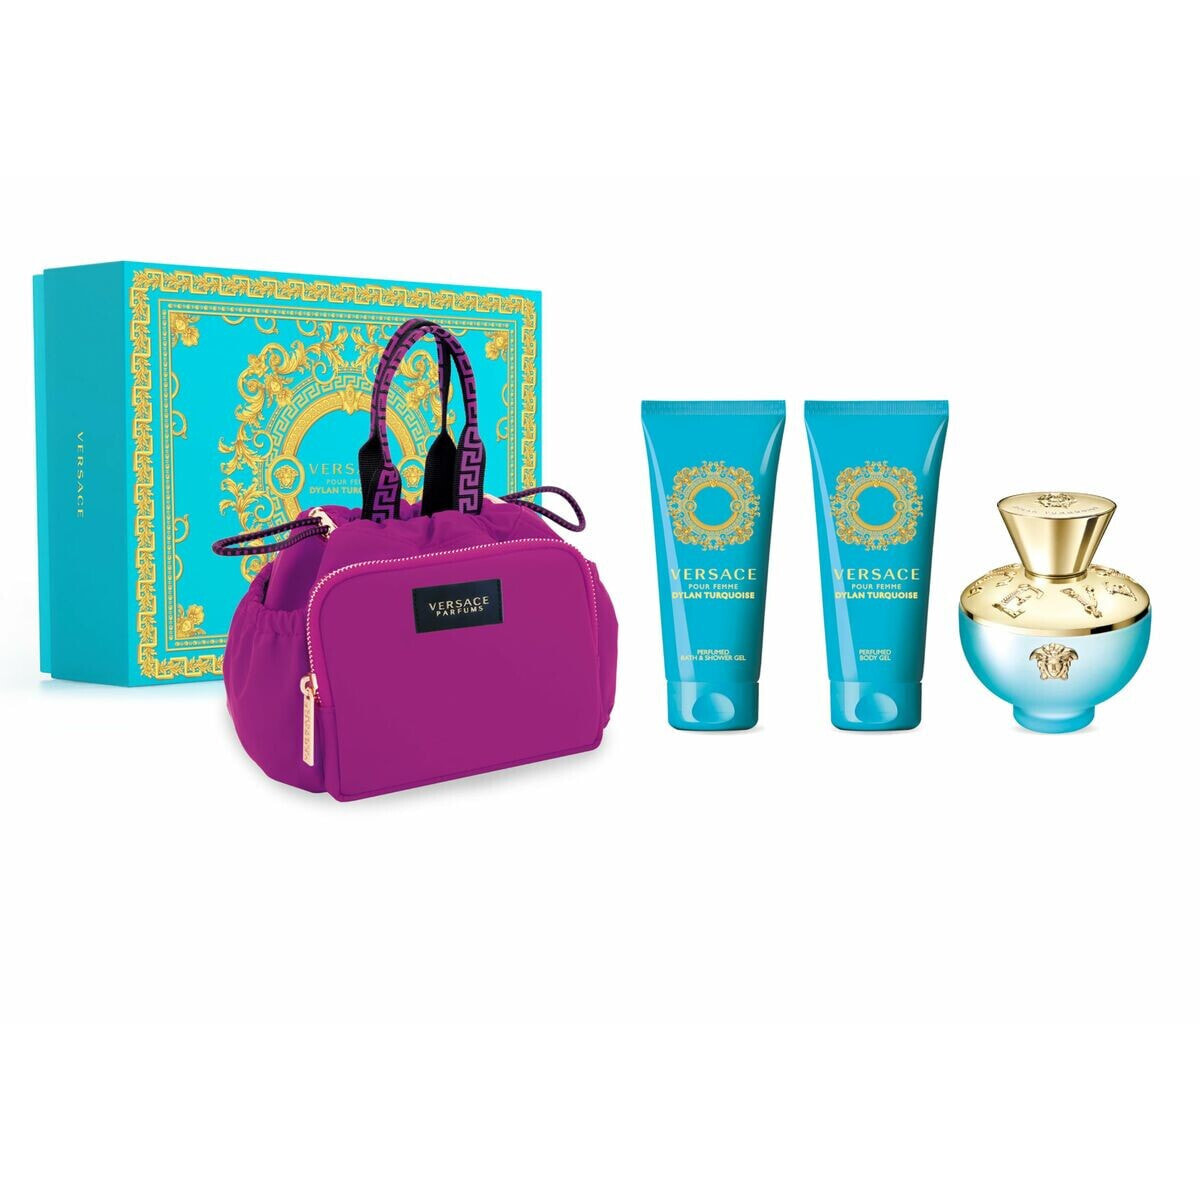 Women's Perfume Set Versace EDT Dylan Turquoise 4 Pieces